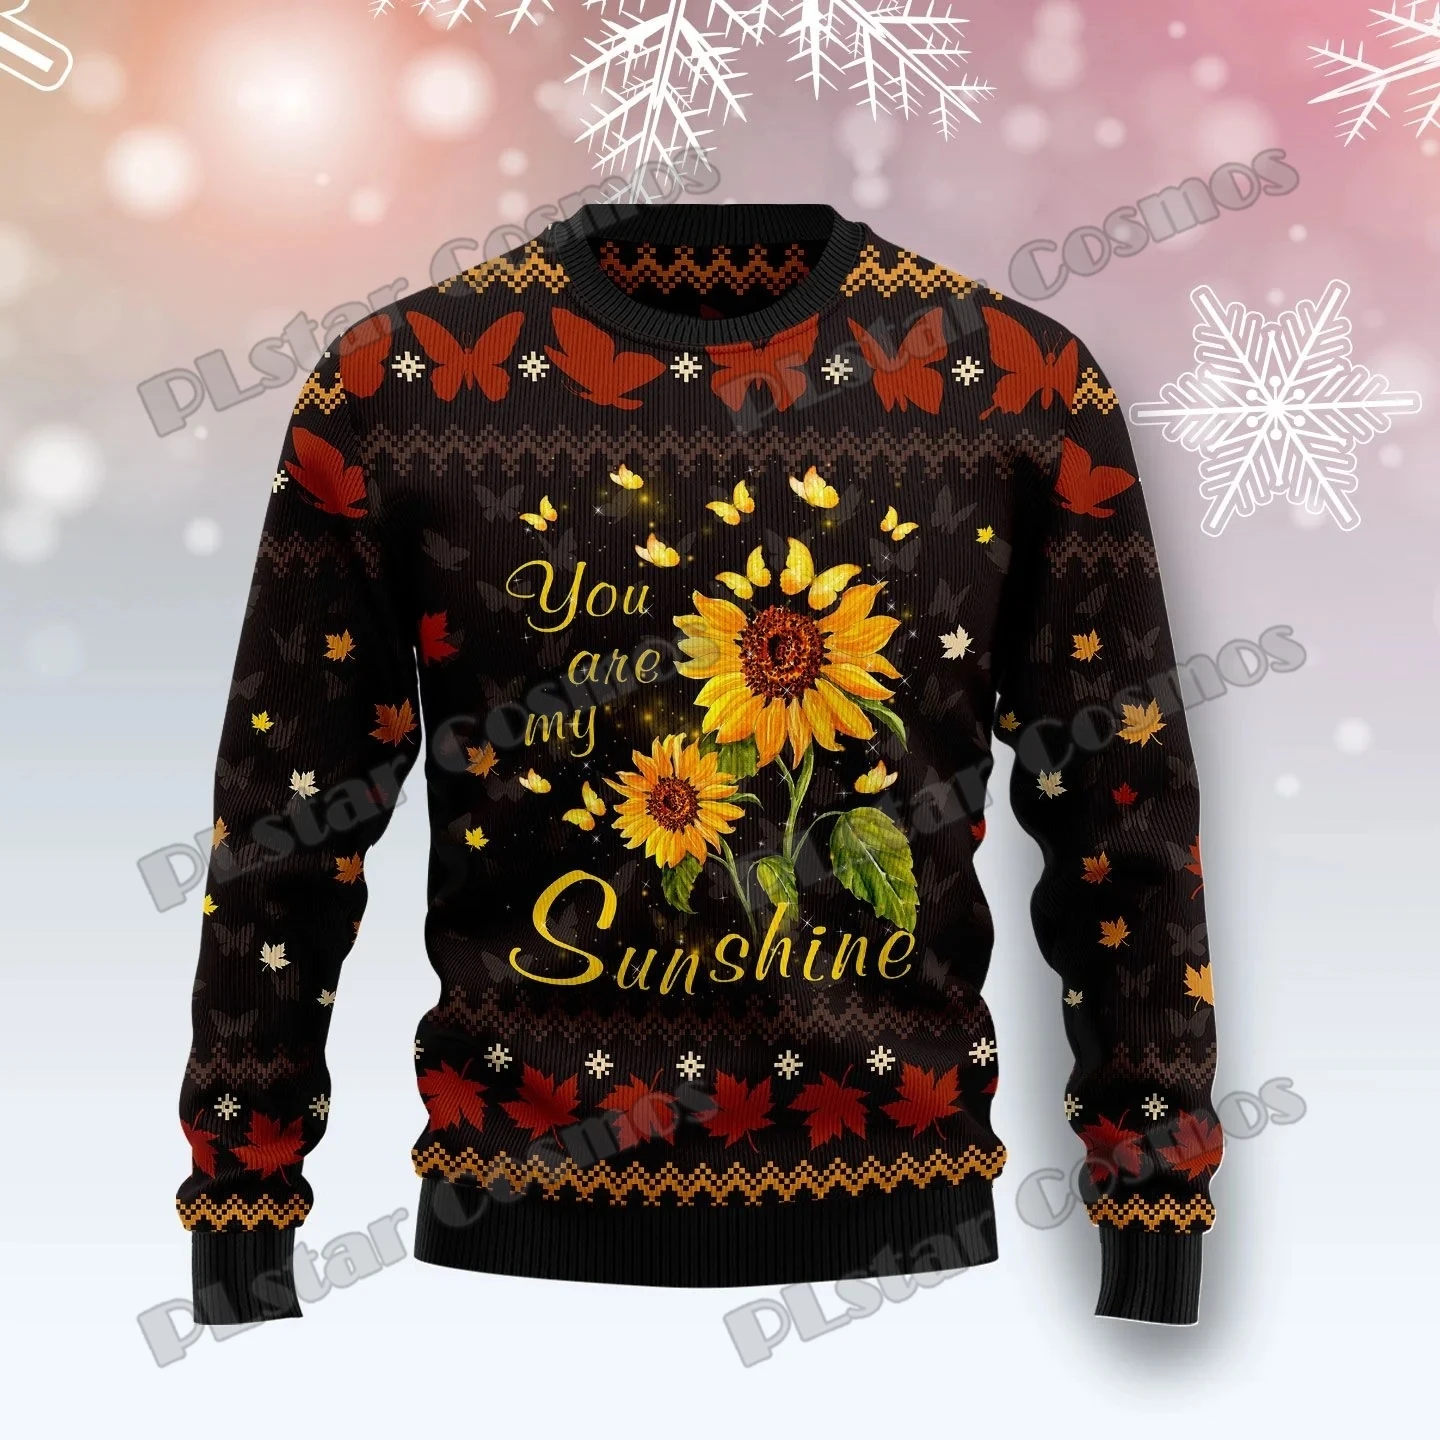 PLstar Cosmos Butterfly Sunshine 3D Printed Fashion Men's Ugly Christmas Sweater Winter Unisex Casual Knitwear Pullover MYY31 plstar cosmos 3d printed animal fishing fashion sweatshirt harajuku casual hoodie pullover funny jacket unisex clothing style 9